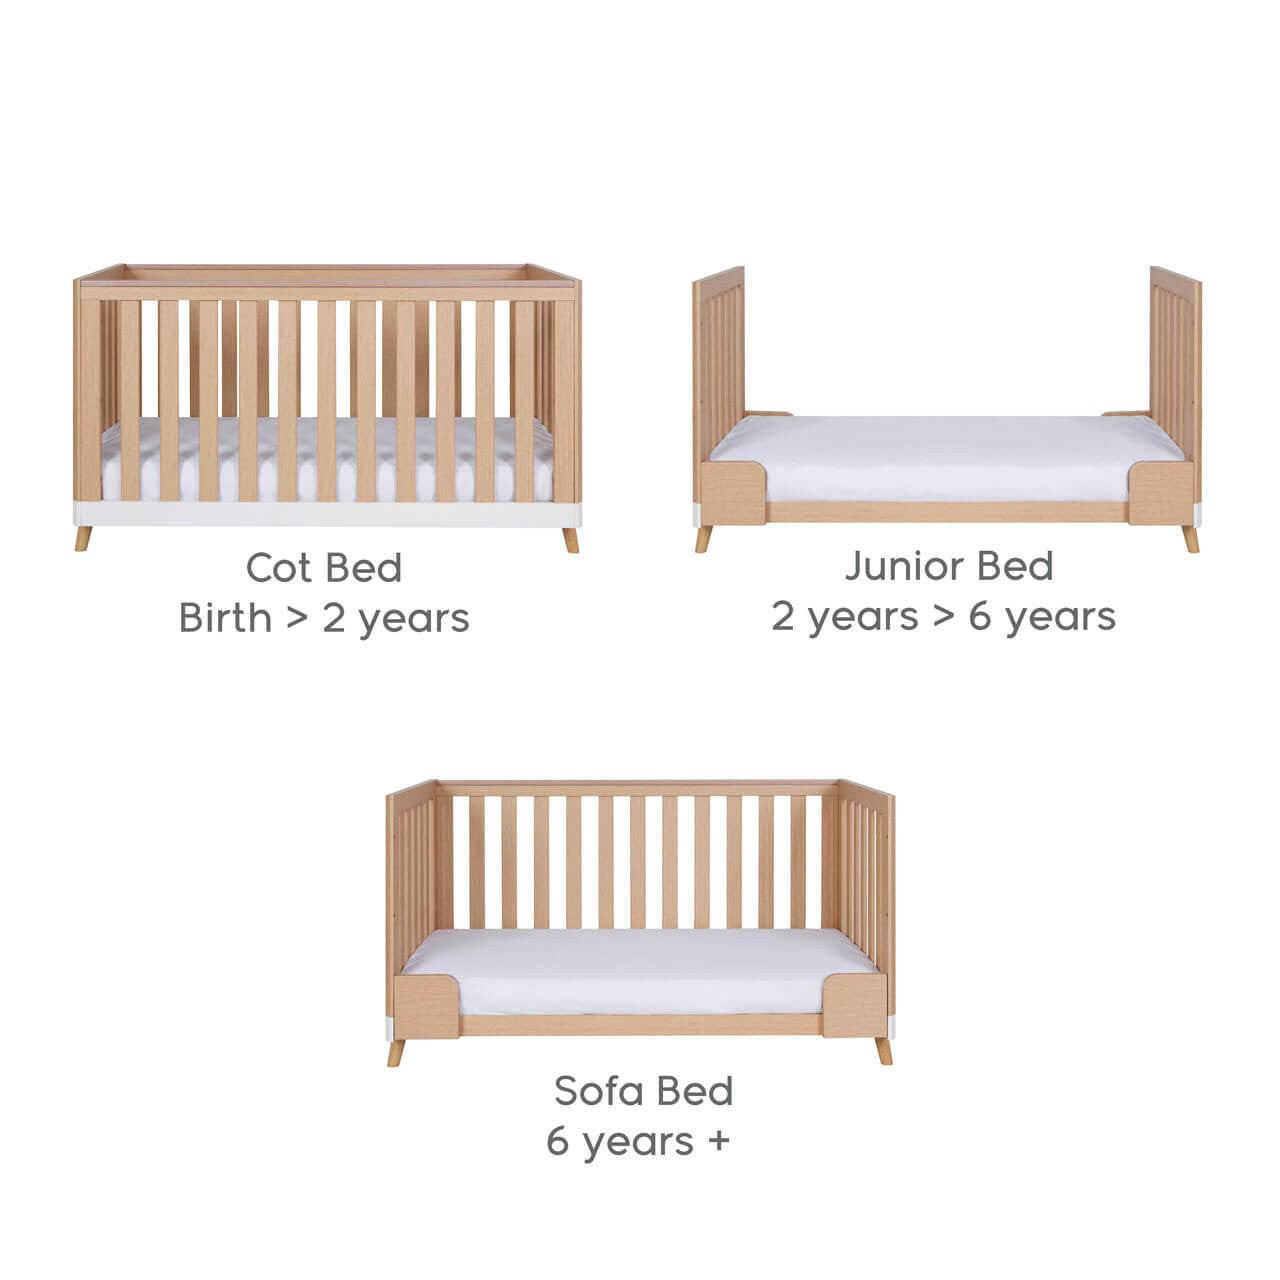 Tutti Bambini Hygge 2 Piece Room Set - White/Light Oak - For Your Little One